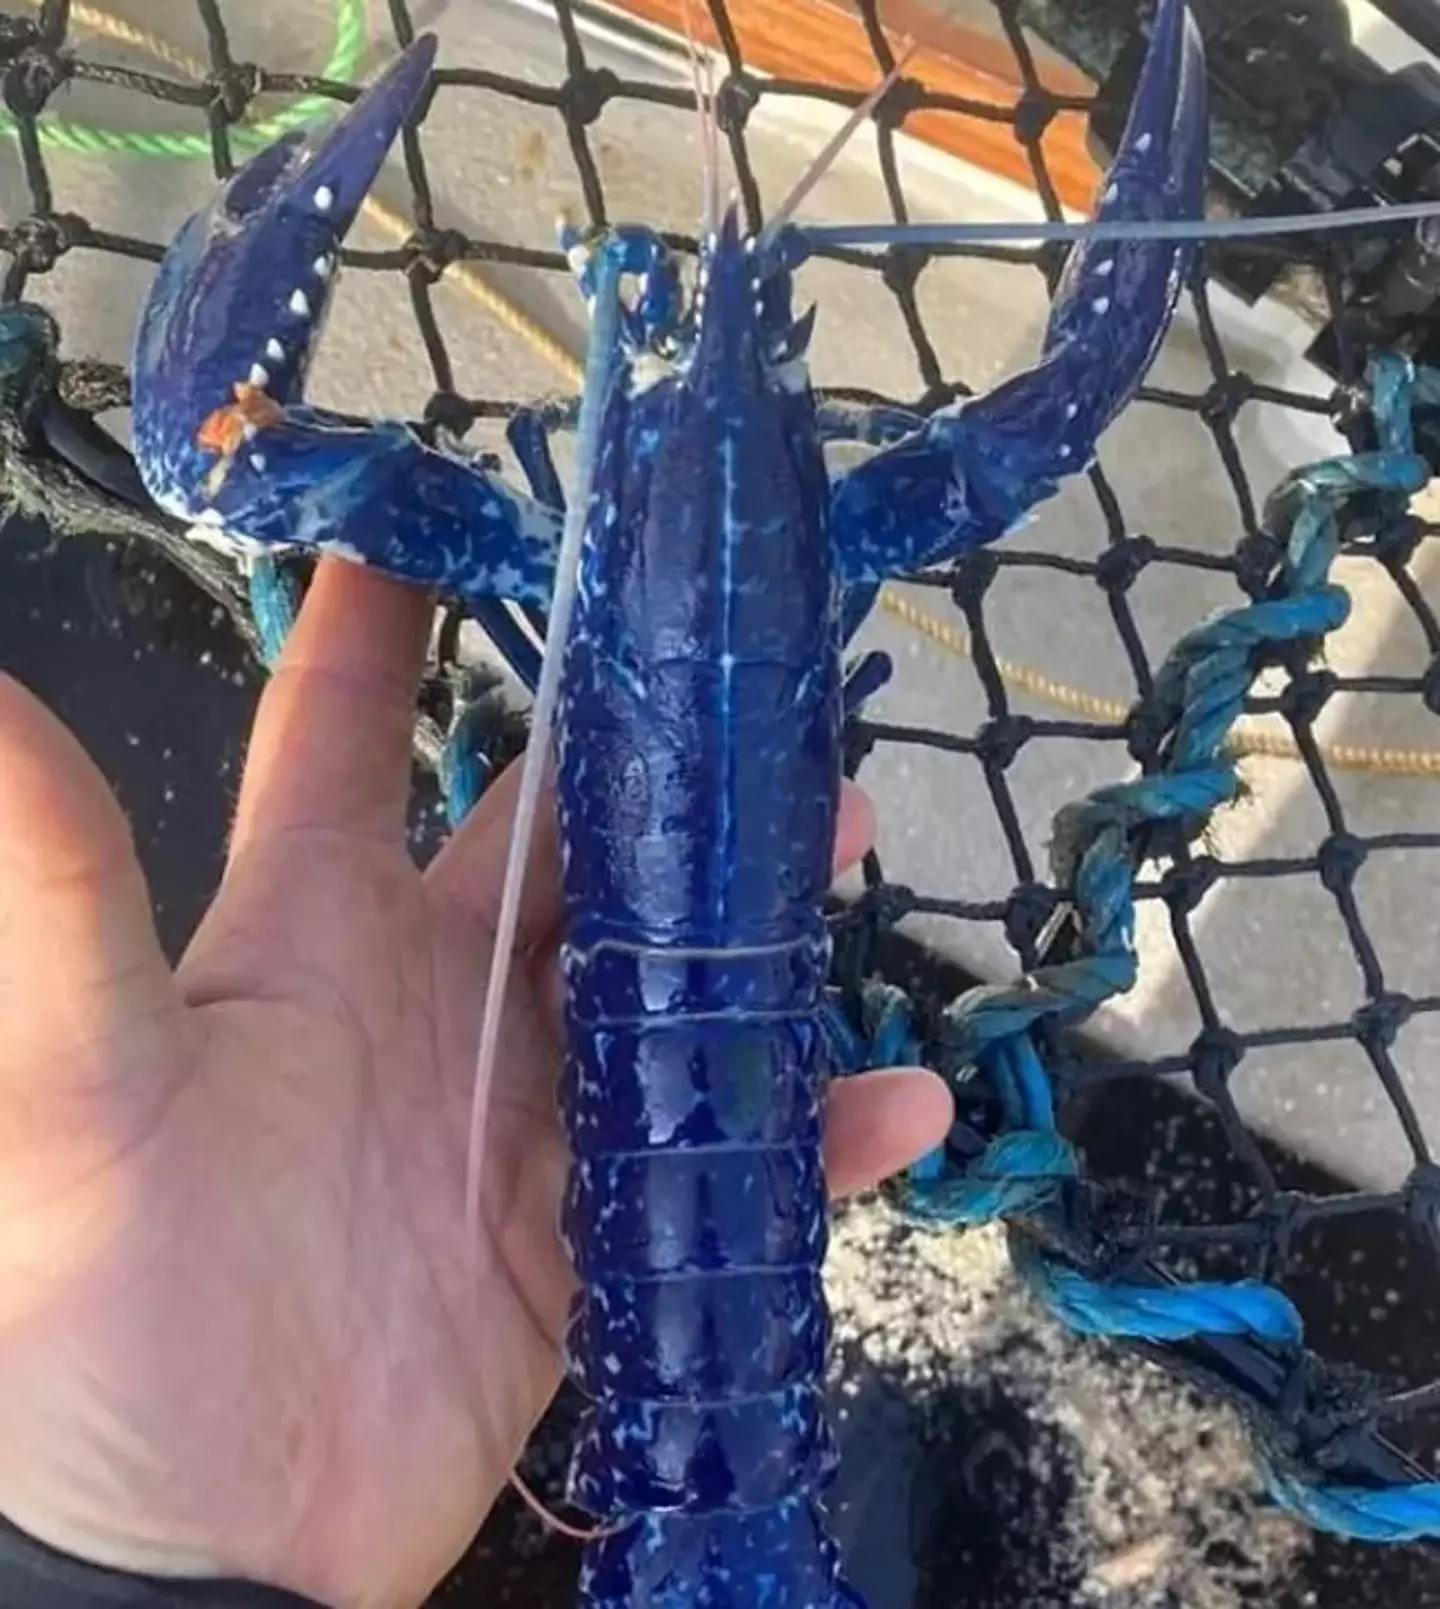 A Cornwall fisherman was also able to catch one of the rare blue lobsters last year.